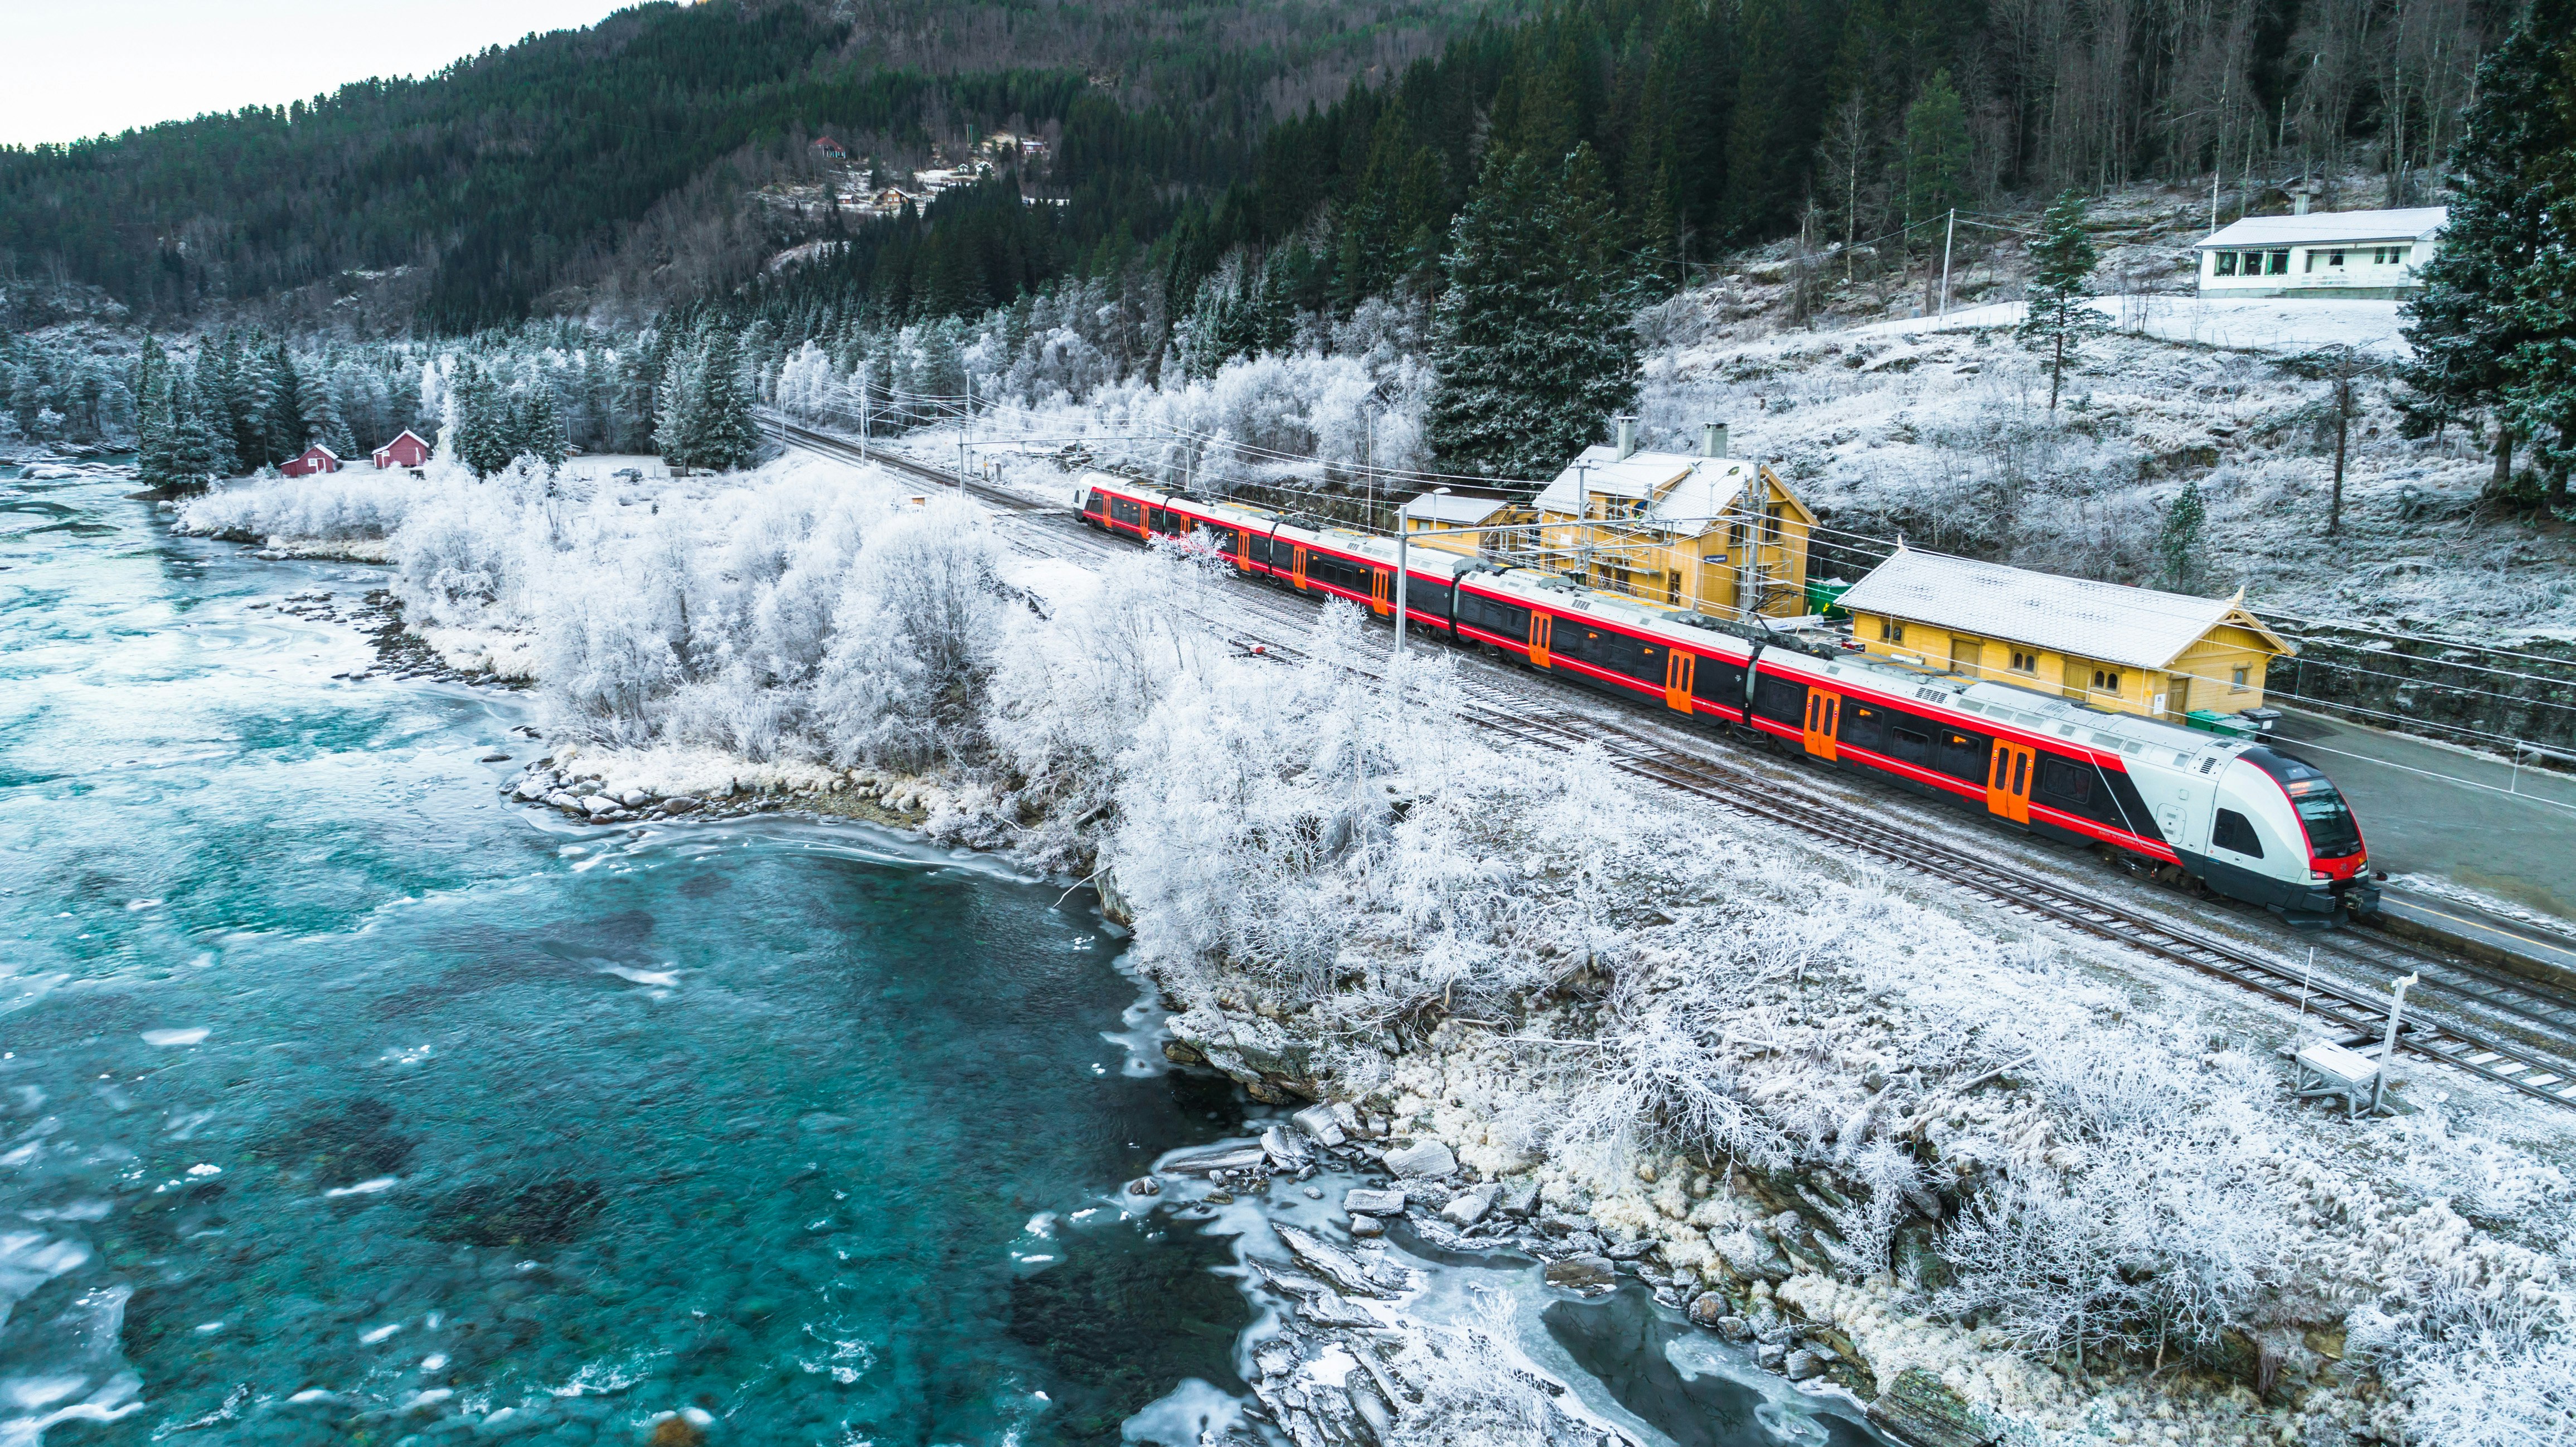 Train traveling in Norway past a blue lake and snow-covered trees